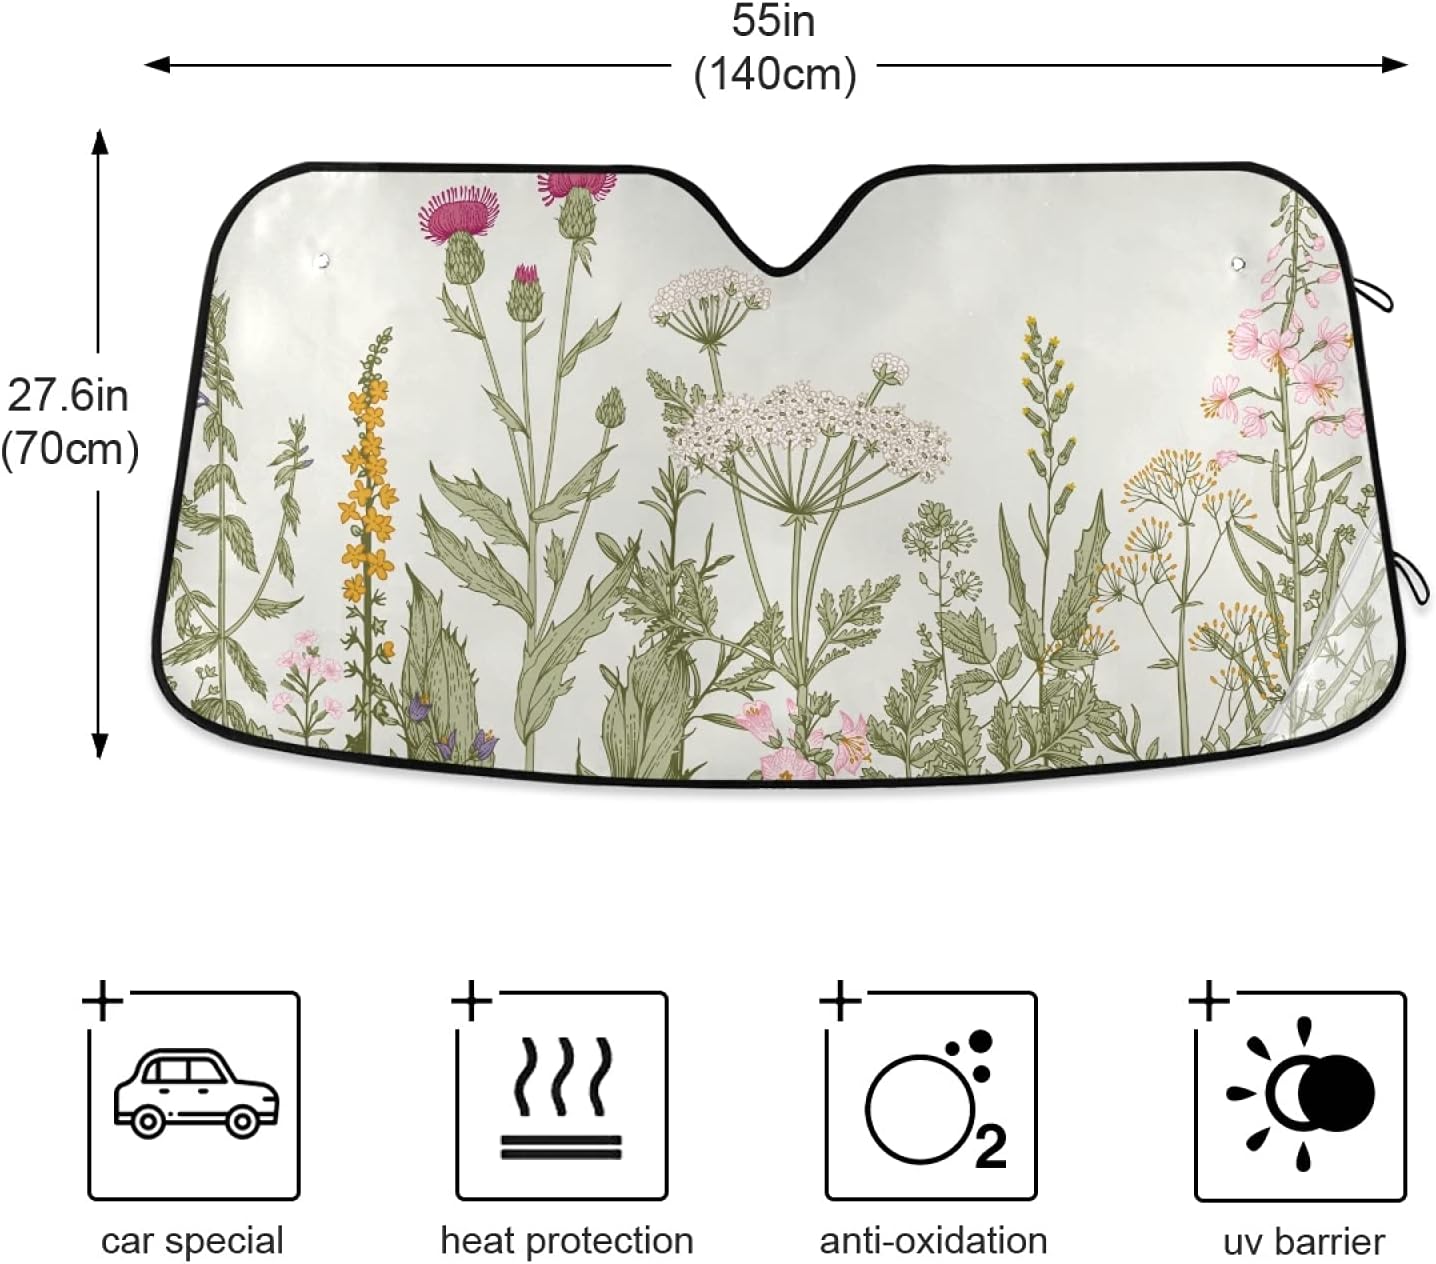 xigua Vintage Colorful Herbs Wild Flowers Floral Car Windshield Sunshade Foldable Front Window Sun Visor Protector for Car,SUV,Truck - Keep Vehicle Cool,55 x 27.6 Inch